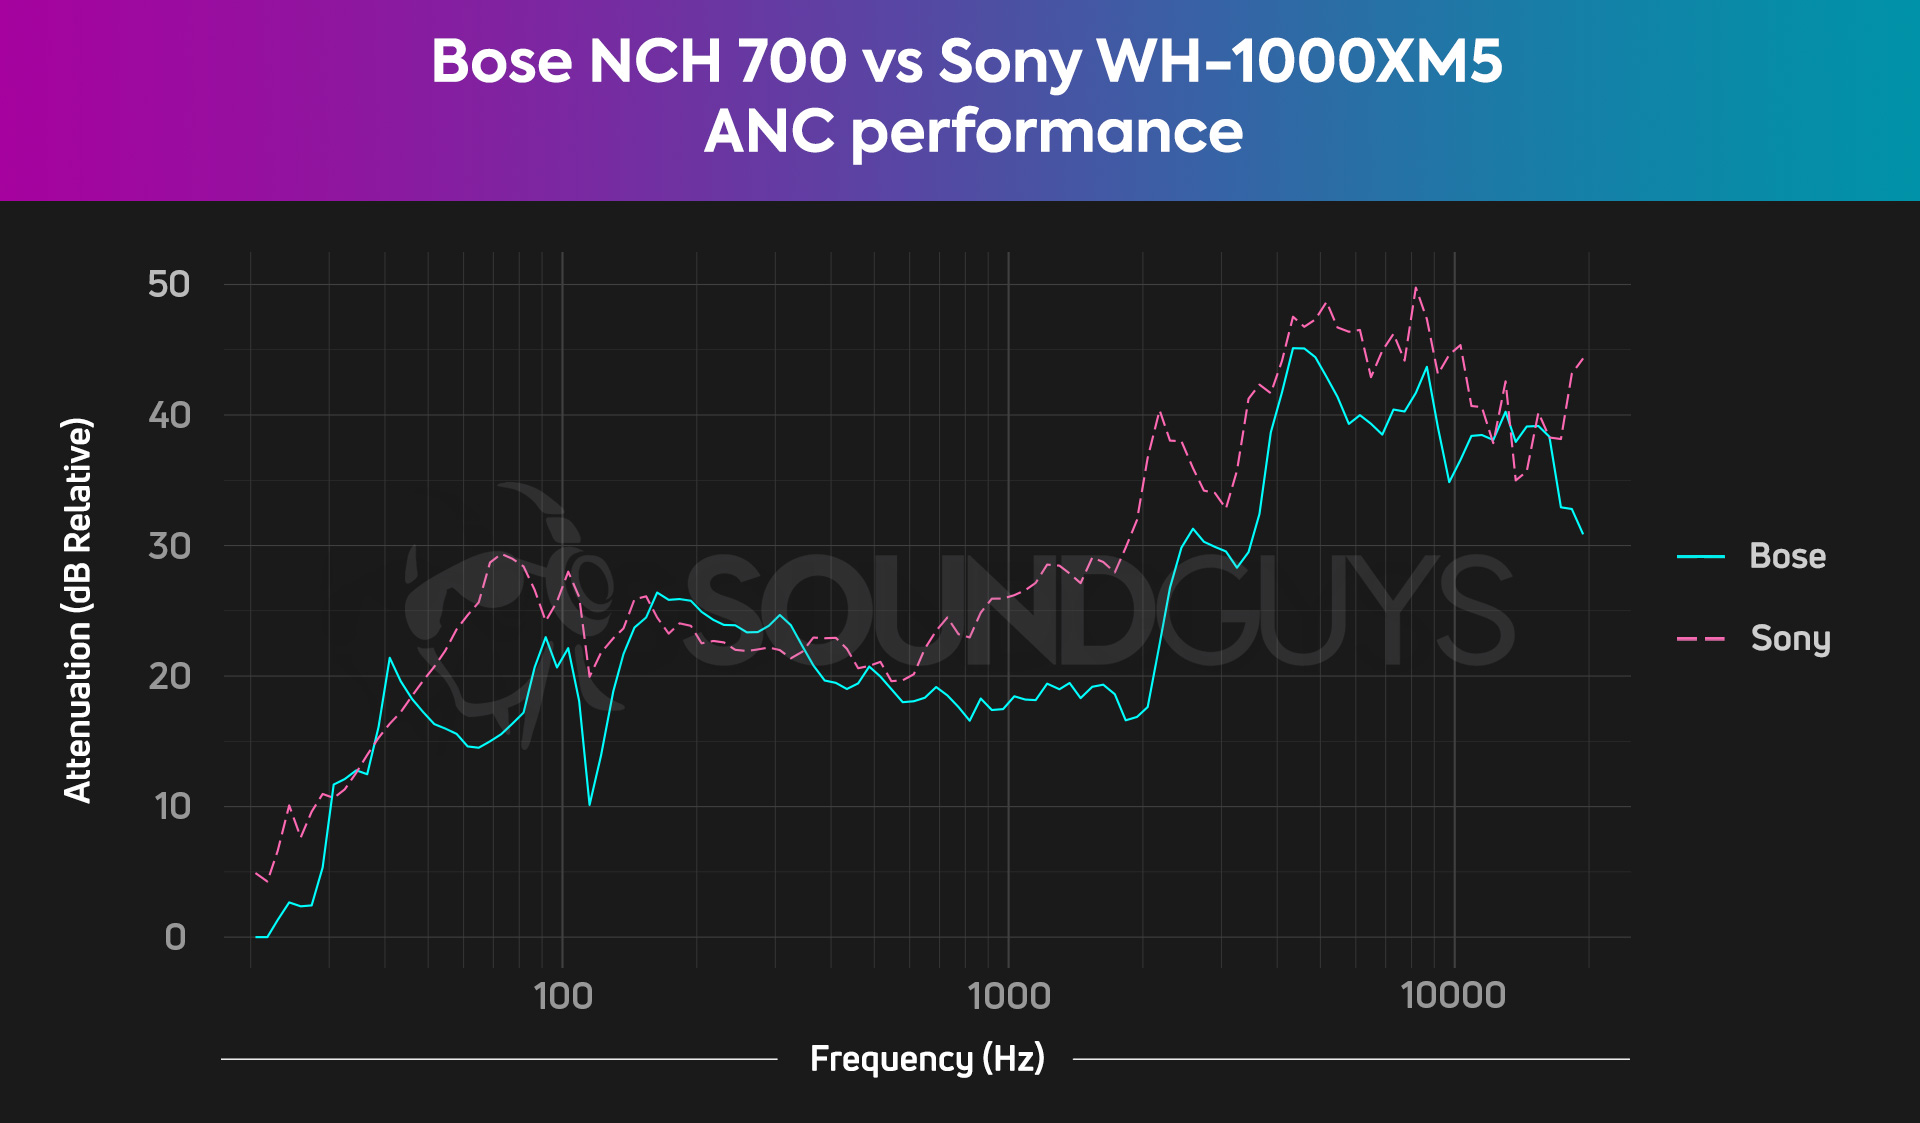 A chart compares the noise canceling of the Bose NCH 700 and Sony WH-1000XM5 to show that the Sony has better attenuation across the frequency spectrum.